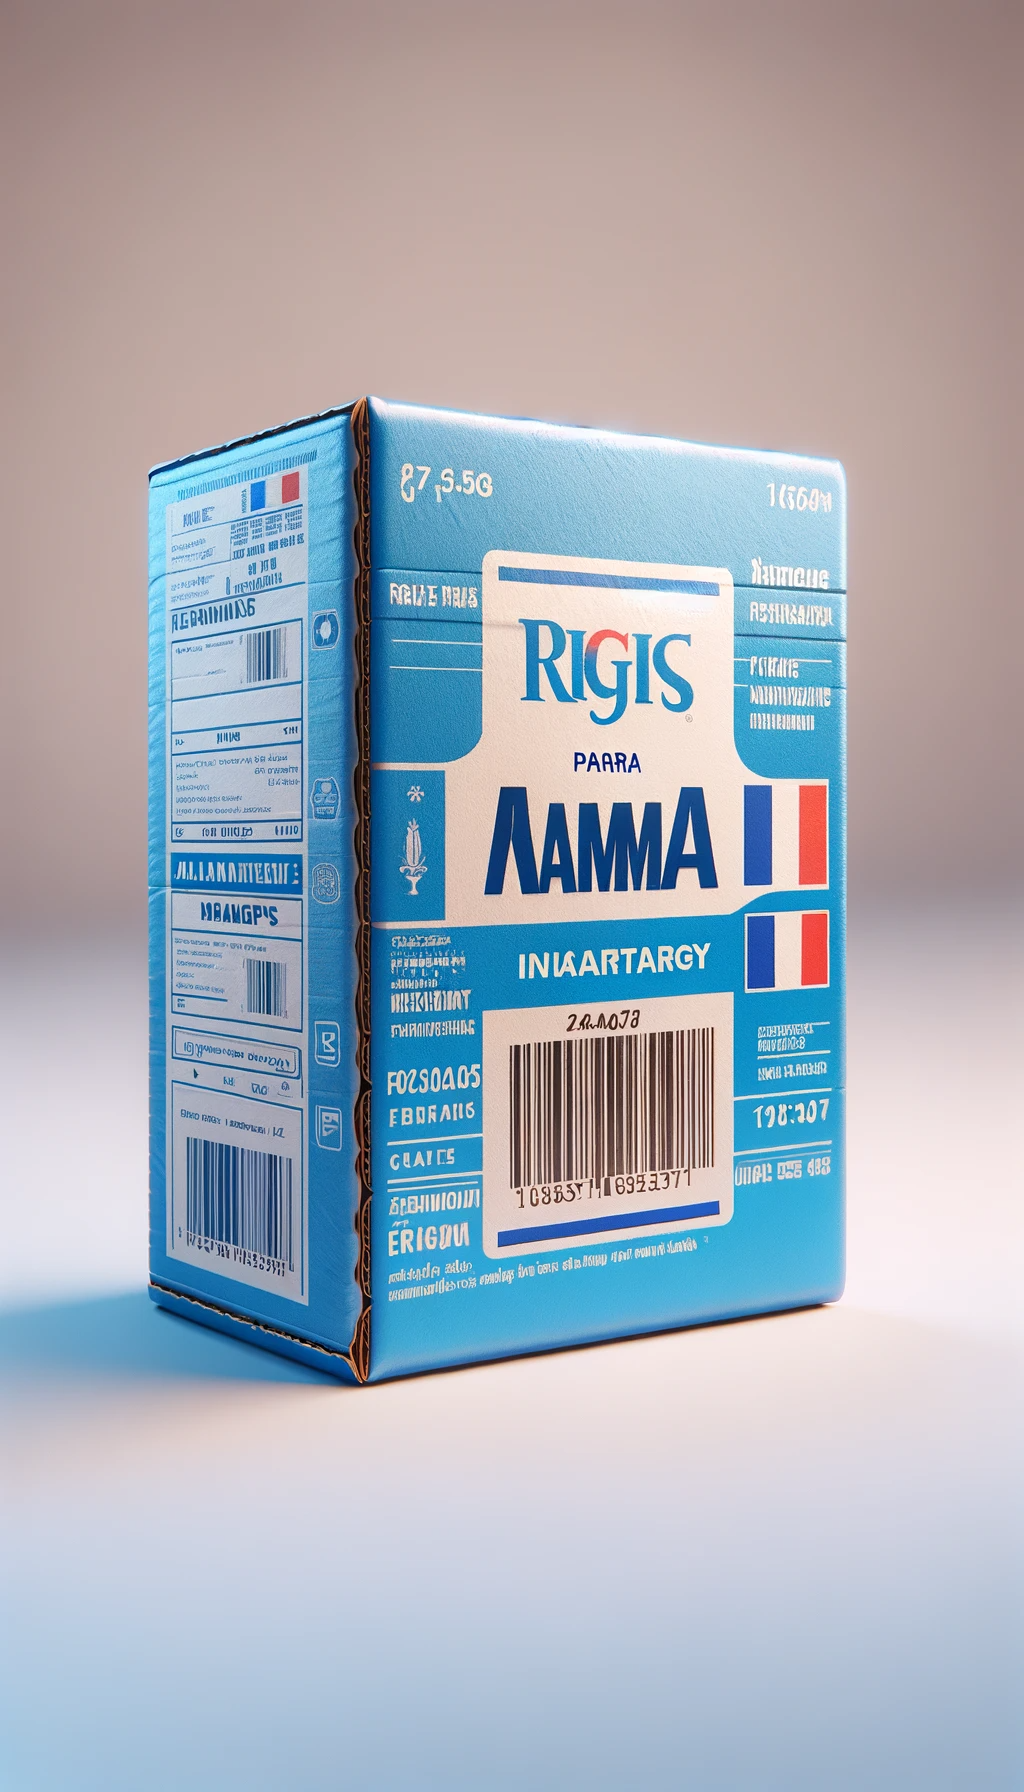 Achat kamagra oral jelly doctissimo